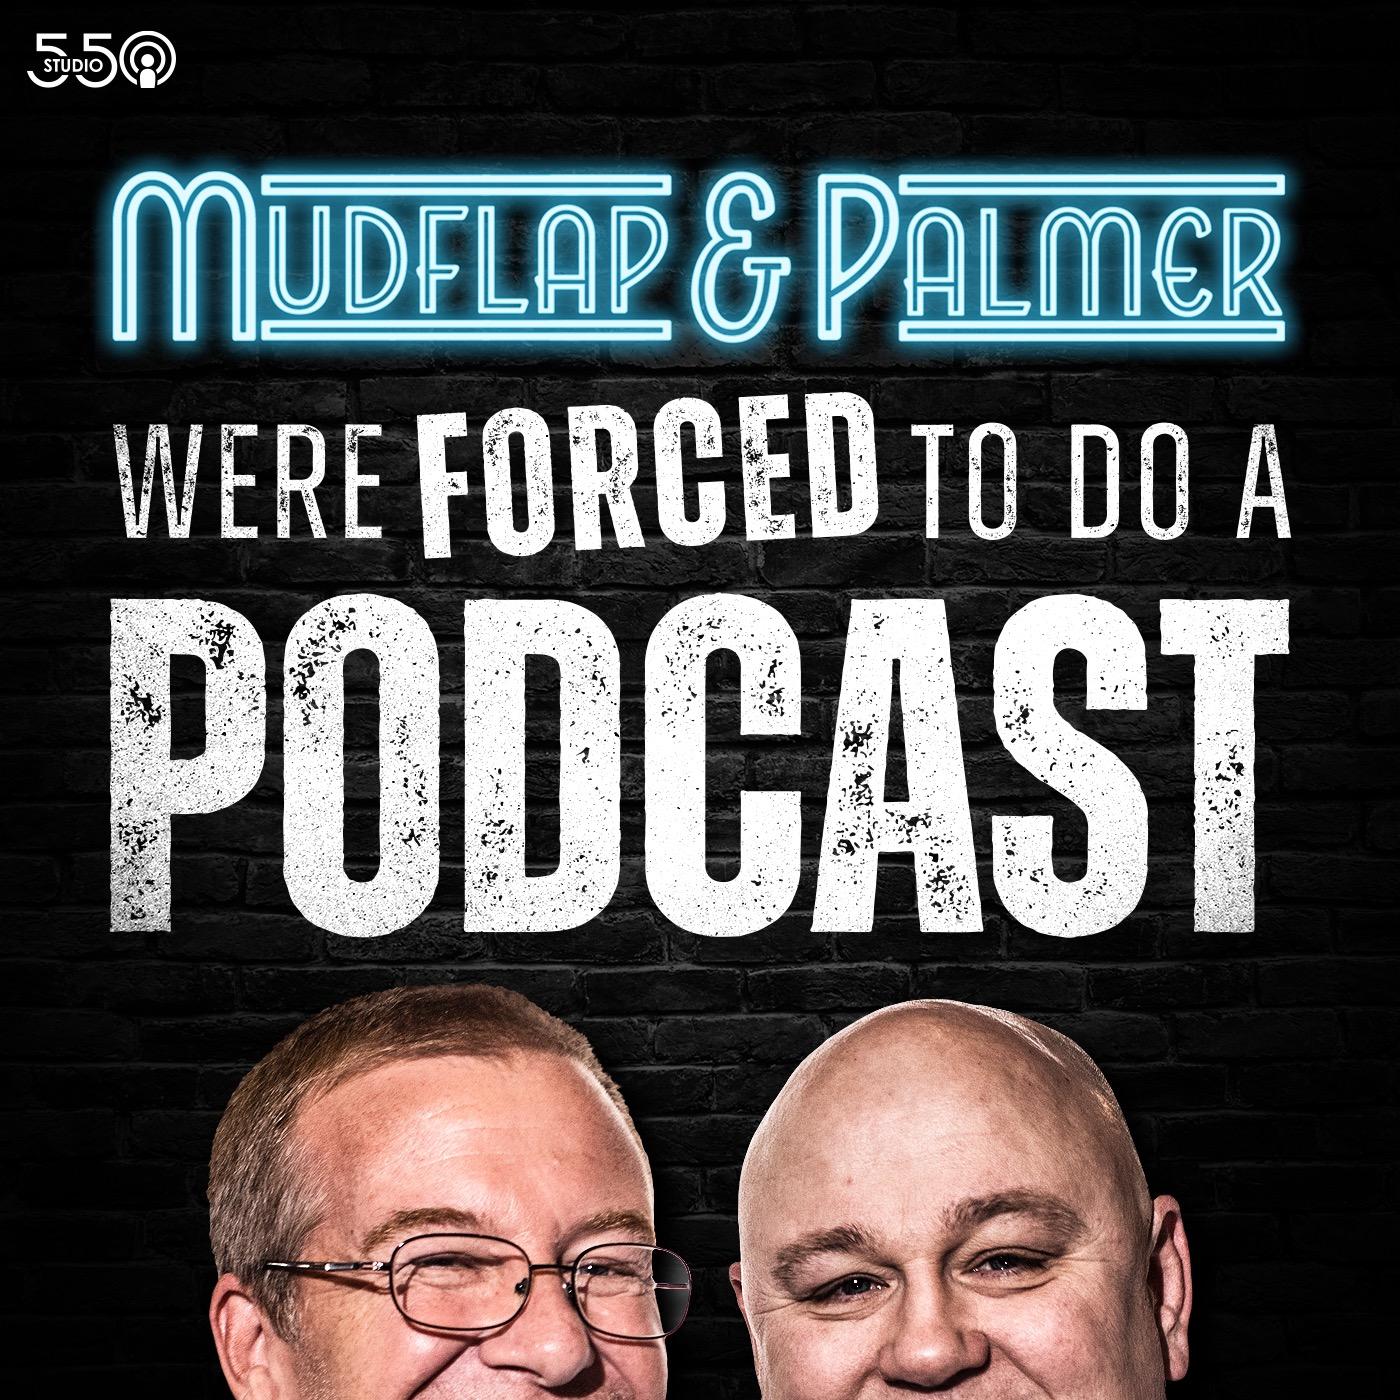 Mudflap & Palmer Were Forced To Do A Podcast